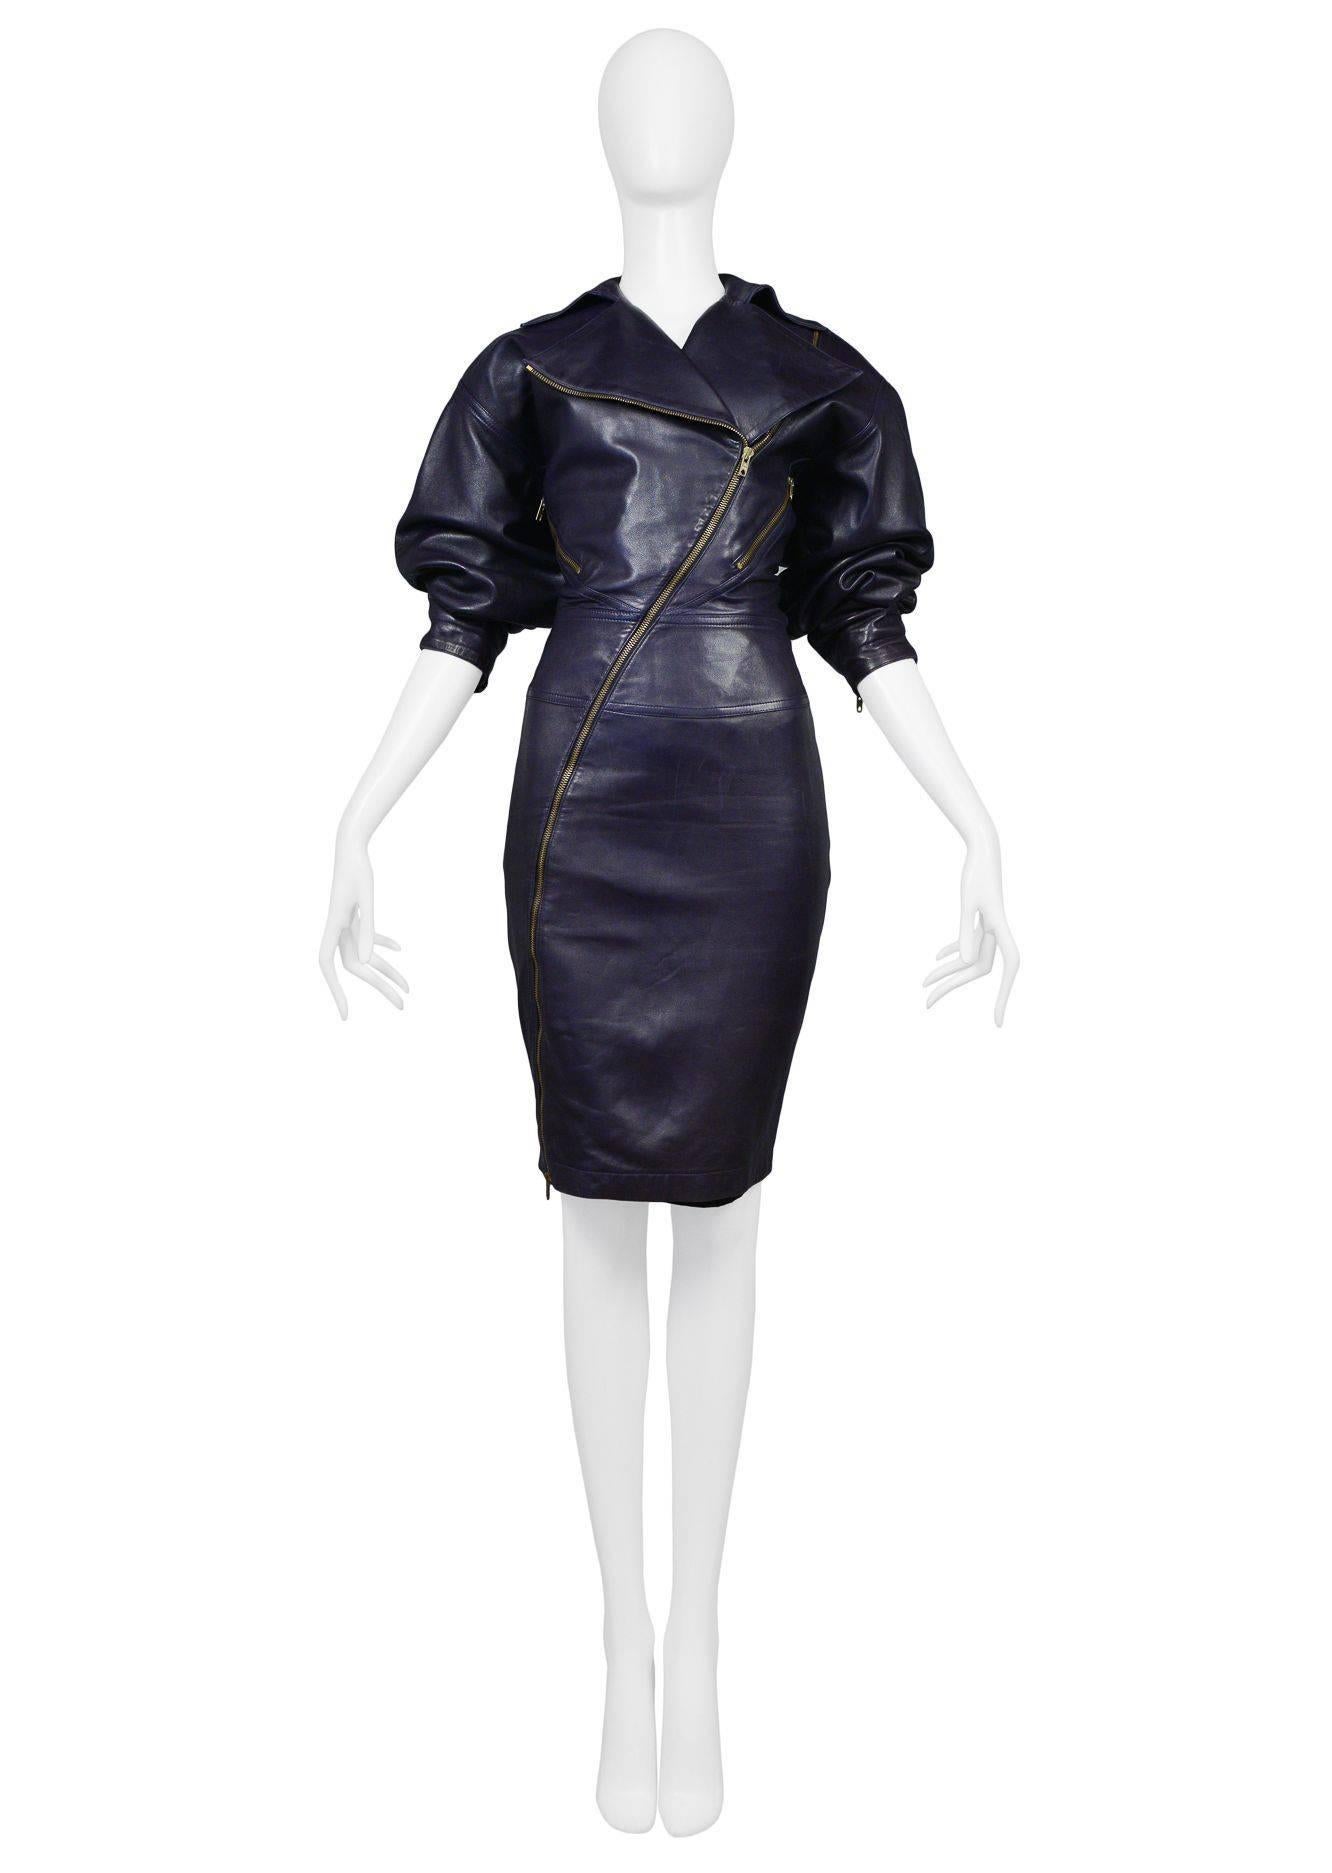 Iconic Azzedine Alaia eggplant leather motorcycle inspired zipper dress. Dress is made of the finest French lambskin leather and features brass toned zippers across body, slanted zipper pockets at waist, and zippers at back of skirt. Oversized